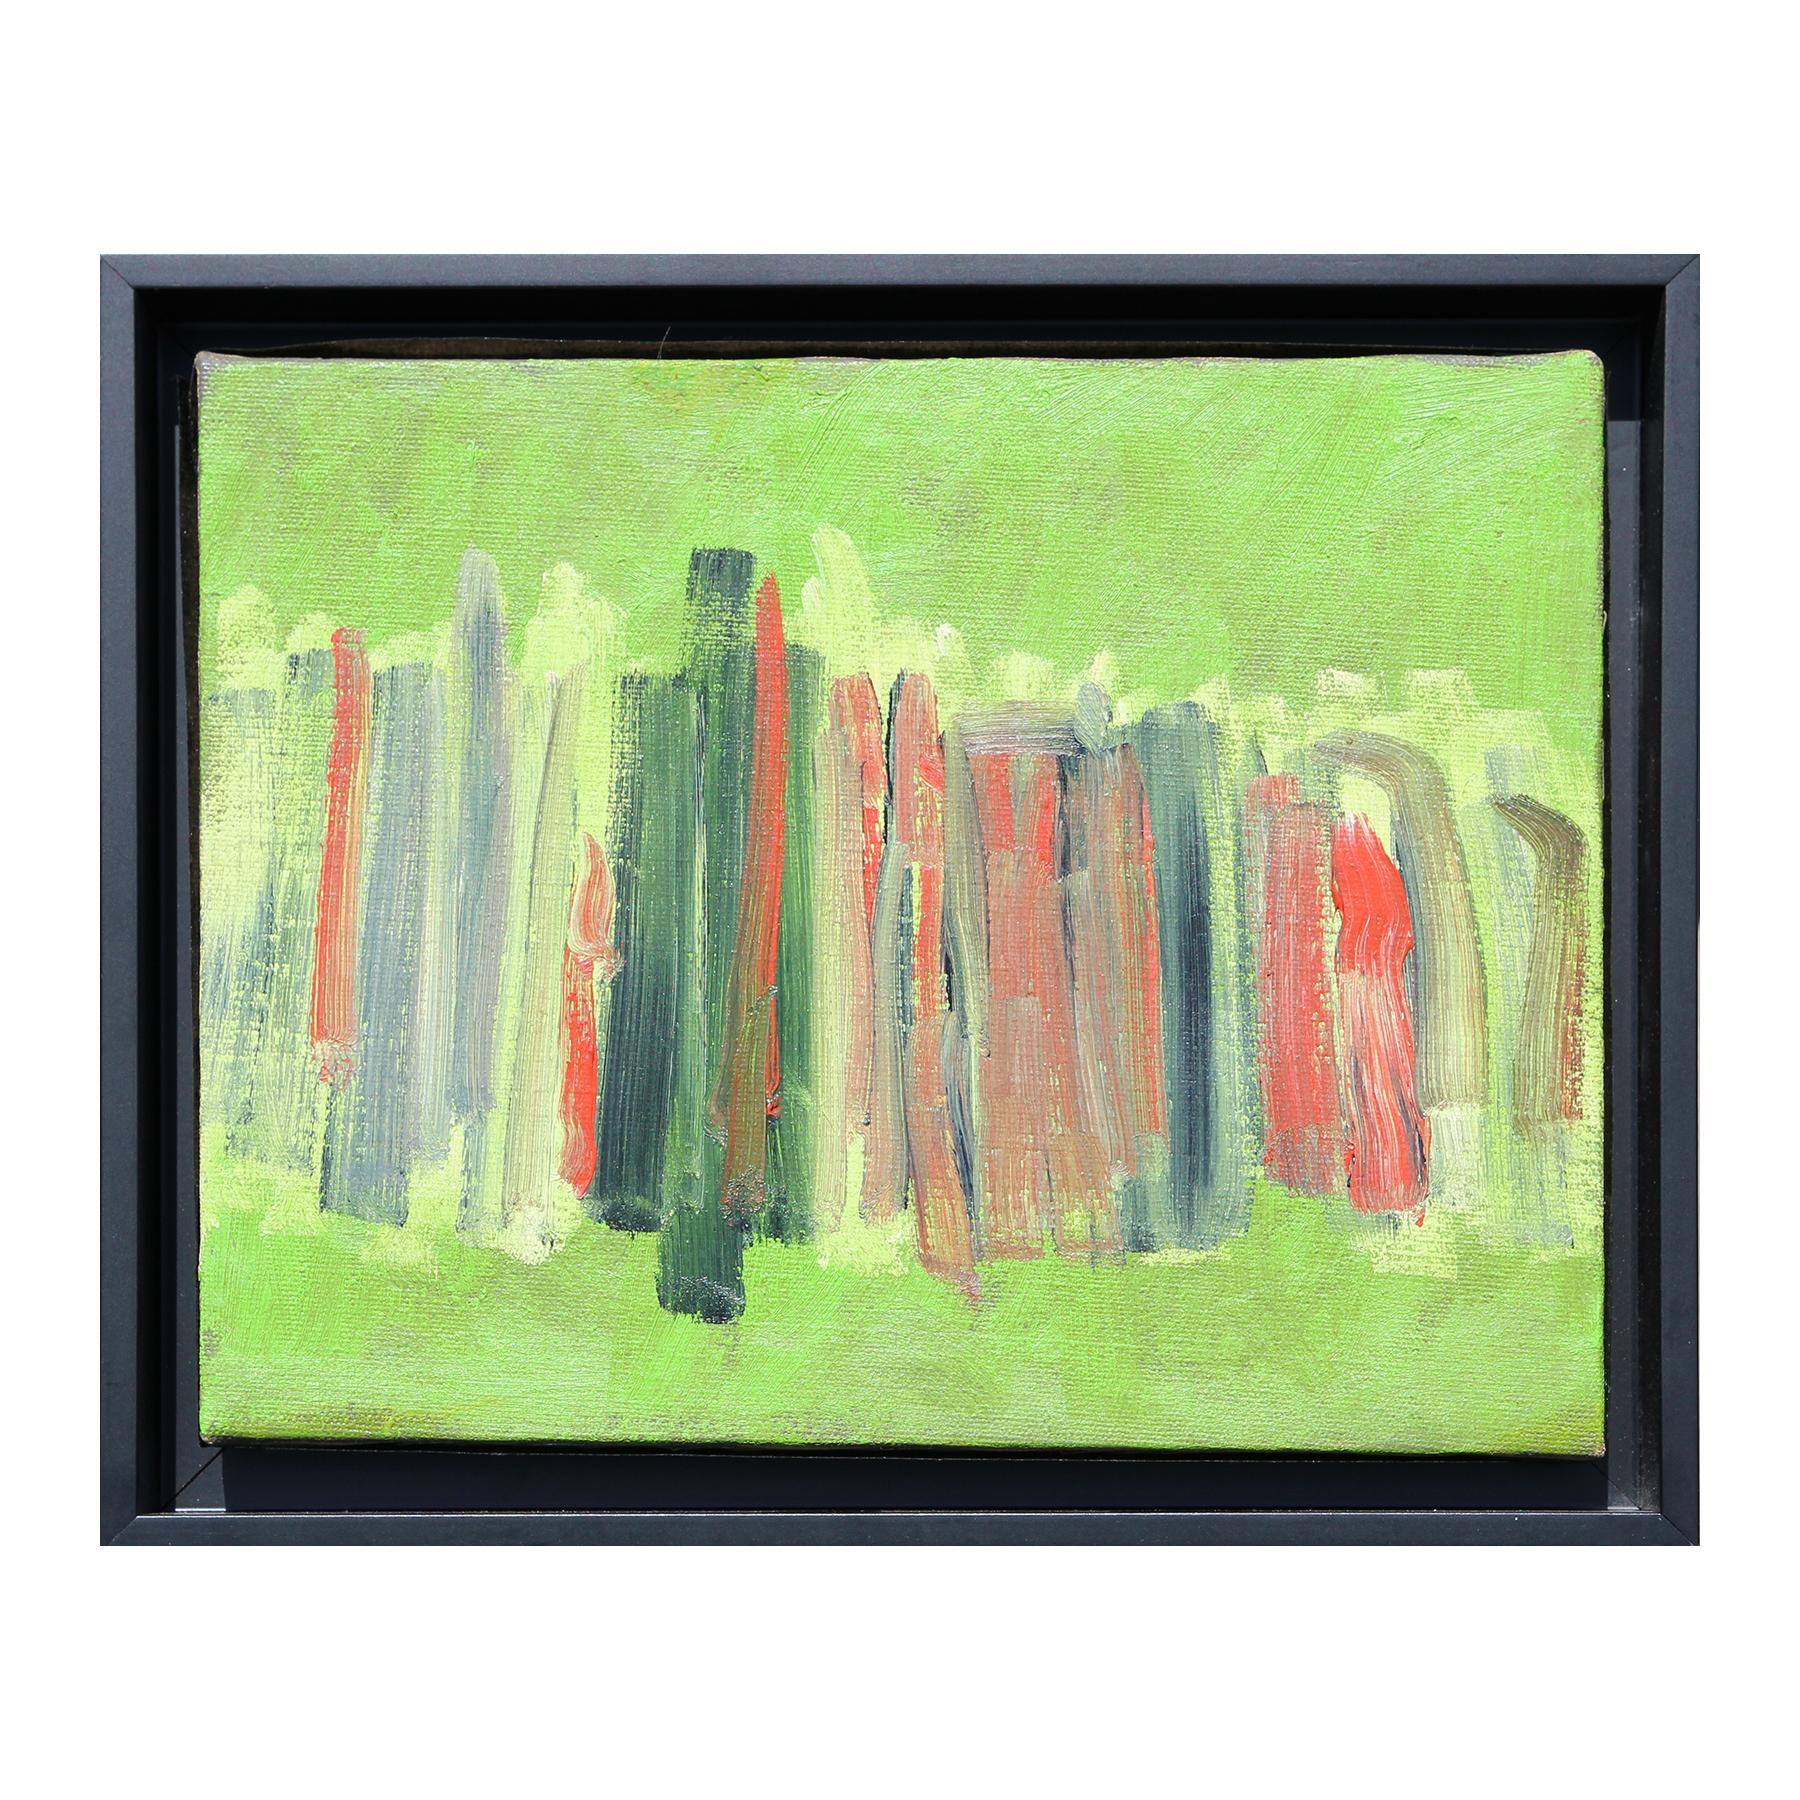 McKie Trotter Landscape Painting - Untitled Abstract Colorful Green and Orange Striped Painting